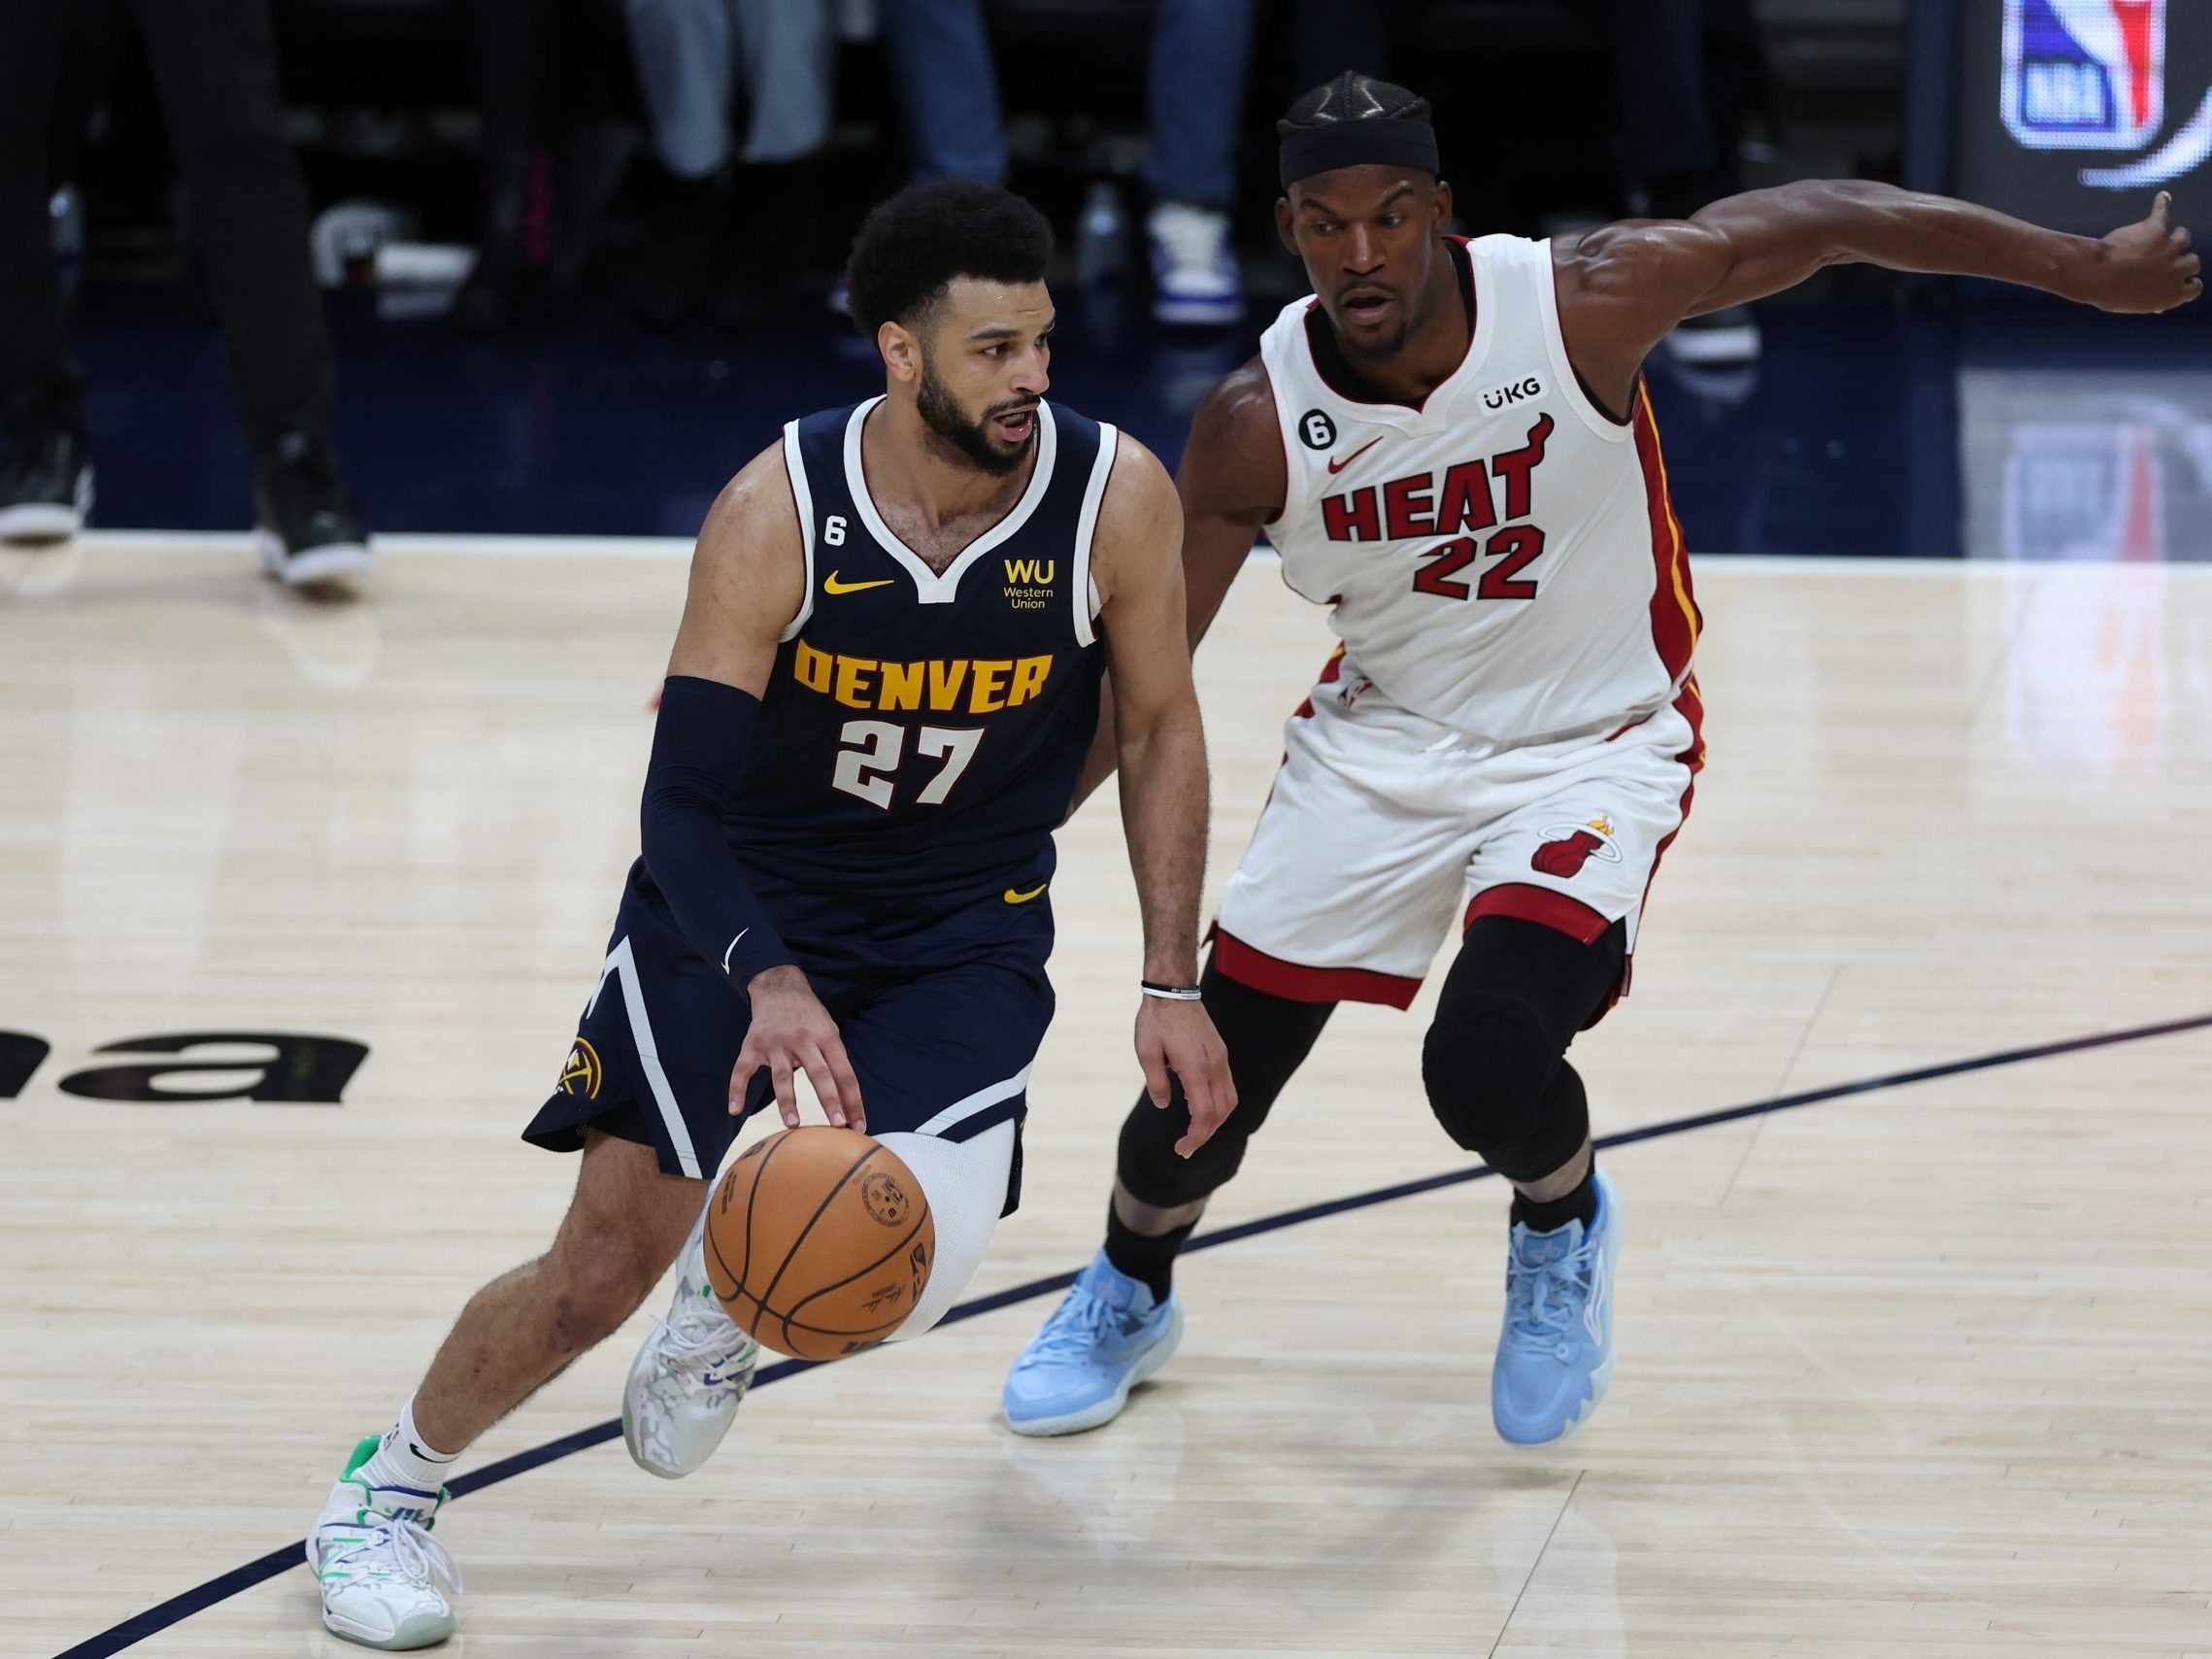 NBA Finals score: Nuggets beat Heat in Game 3 with depth, defense